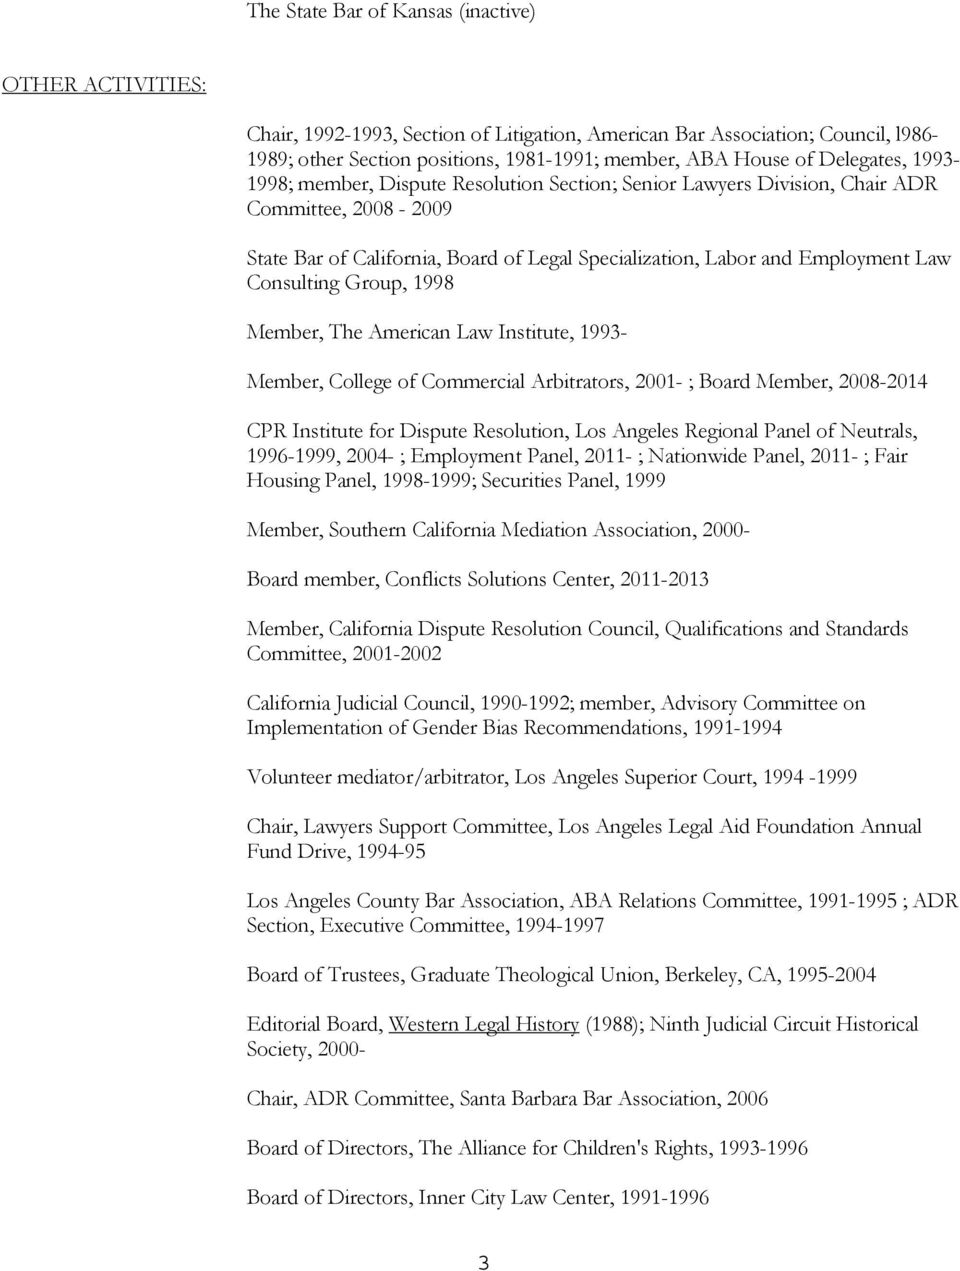 Consulting Group, 1998 Member, The American Law Institute, 1993- Member, College of Commercial Arbitrators, 2001- ; Board Member, 2008-2014 CPR Institute for Dispute Resolution, Los Angeles Regional